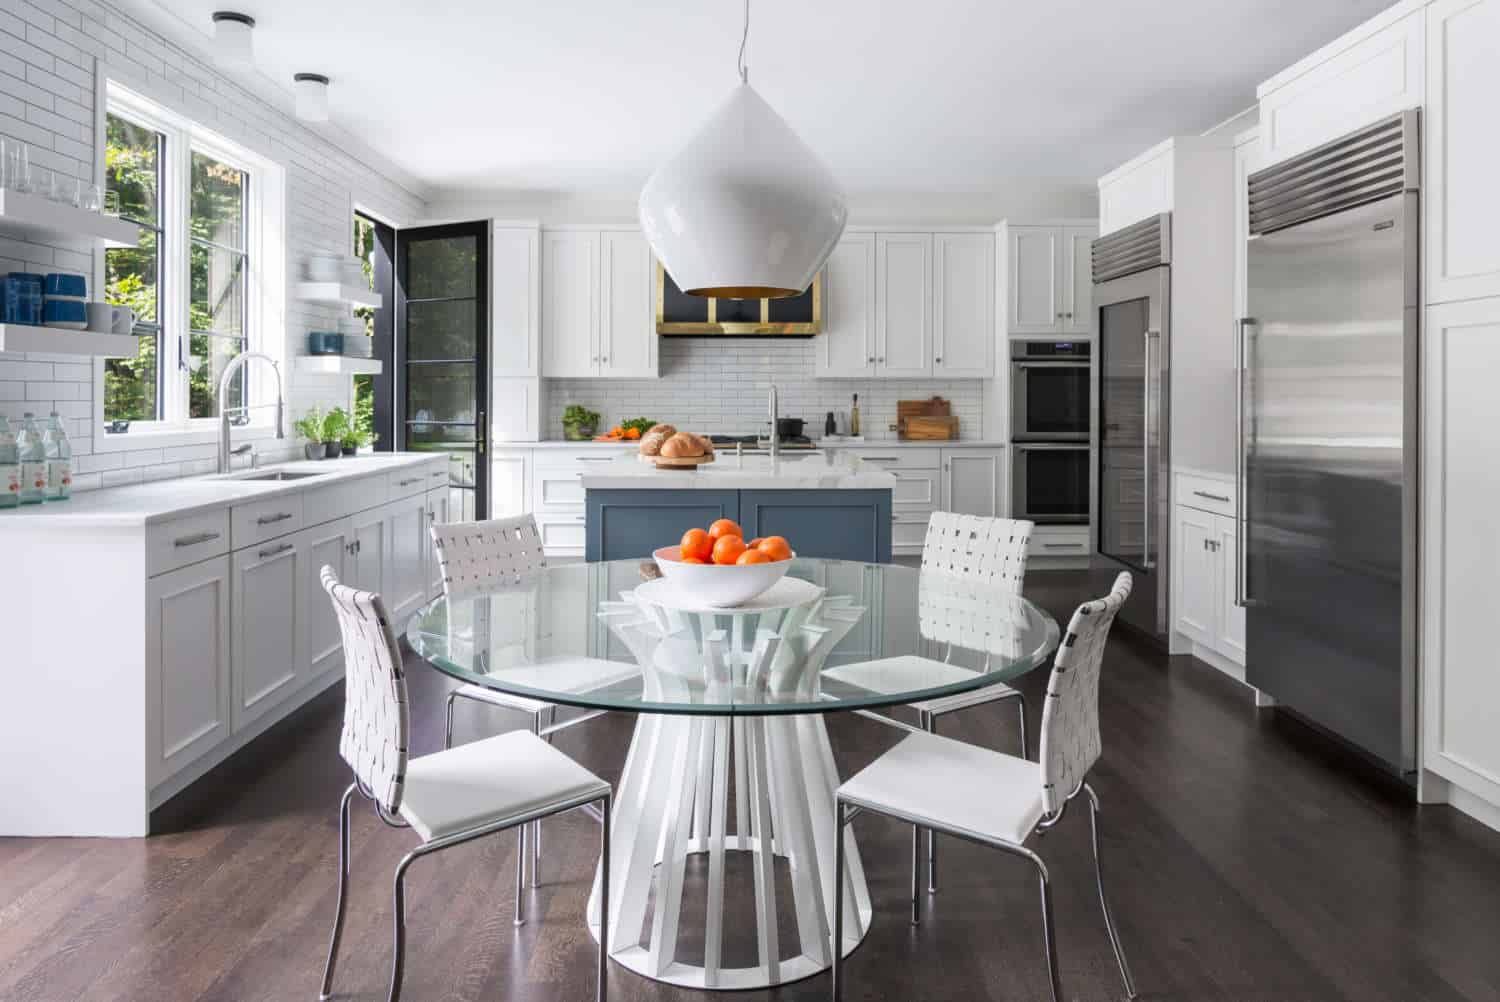 Classic all white Chappaqua kitchen features Bilotta recessed panel cabinets accented by a Blue Toile painted center island.